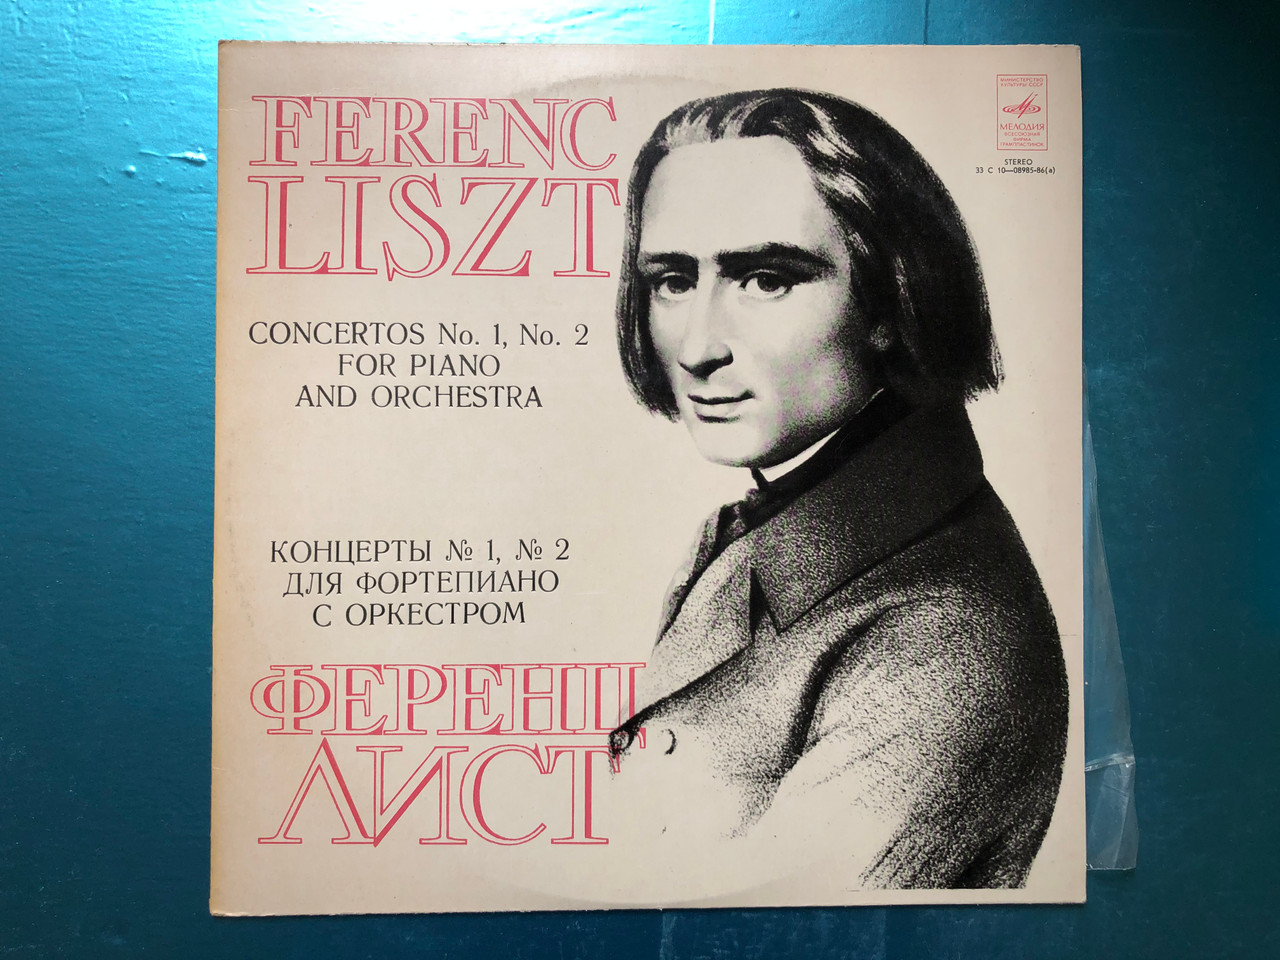 https://cdn10.bigcommerce.com/s-62bdpkt7pb/products/30184/images/178807/Ferenc_Liszt_Concertos_No.1_No._2_For_Piano_And_Orchestra_LP_Stereo_33_C_10-08985-86a_1__88976.1621582848.1280.1280.JPG?c=2&_ga=2.38985763.1209353241.1621868323-56073237.1621868323